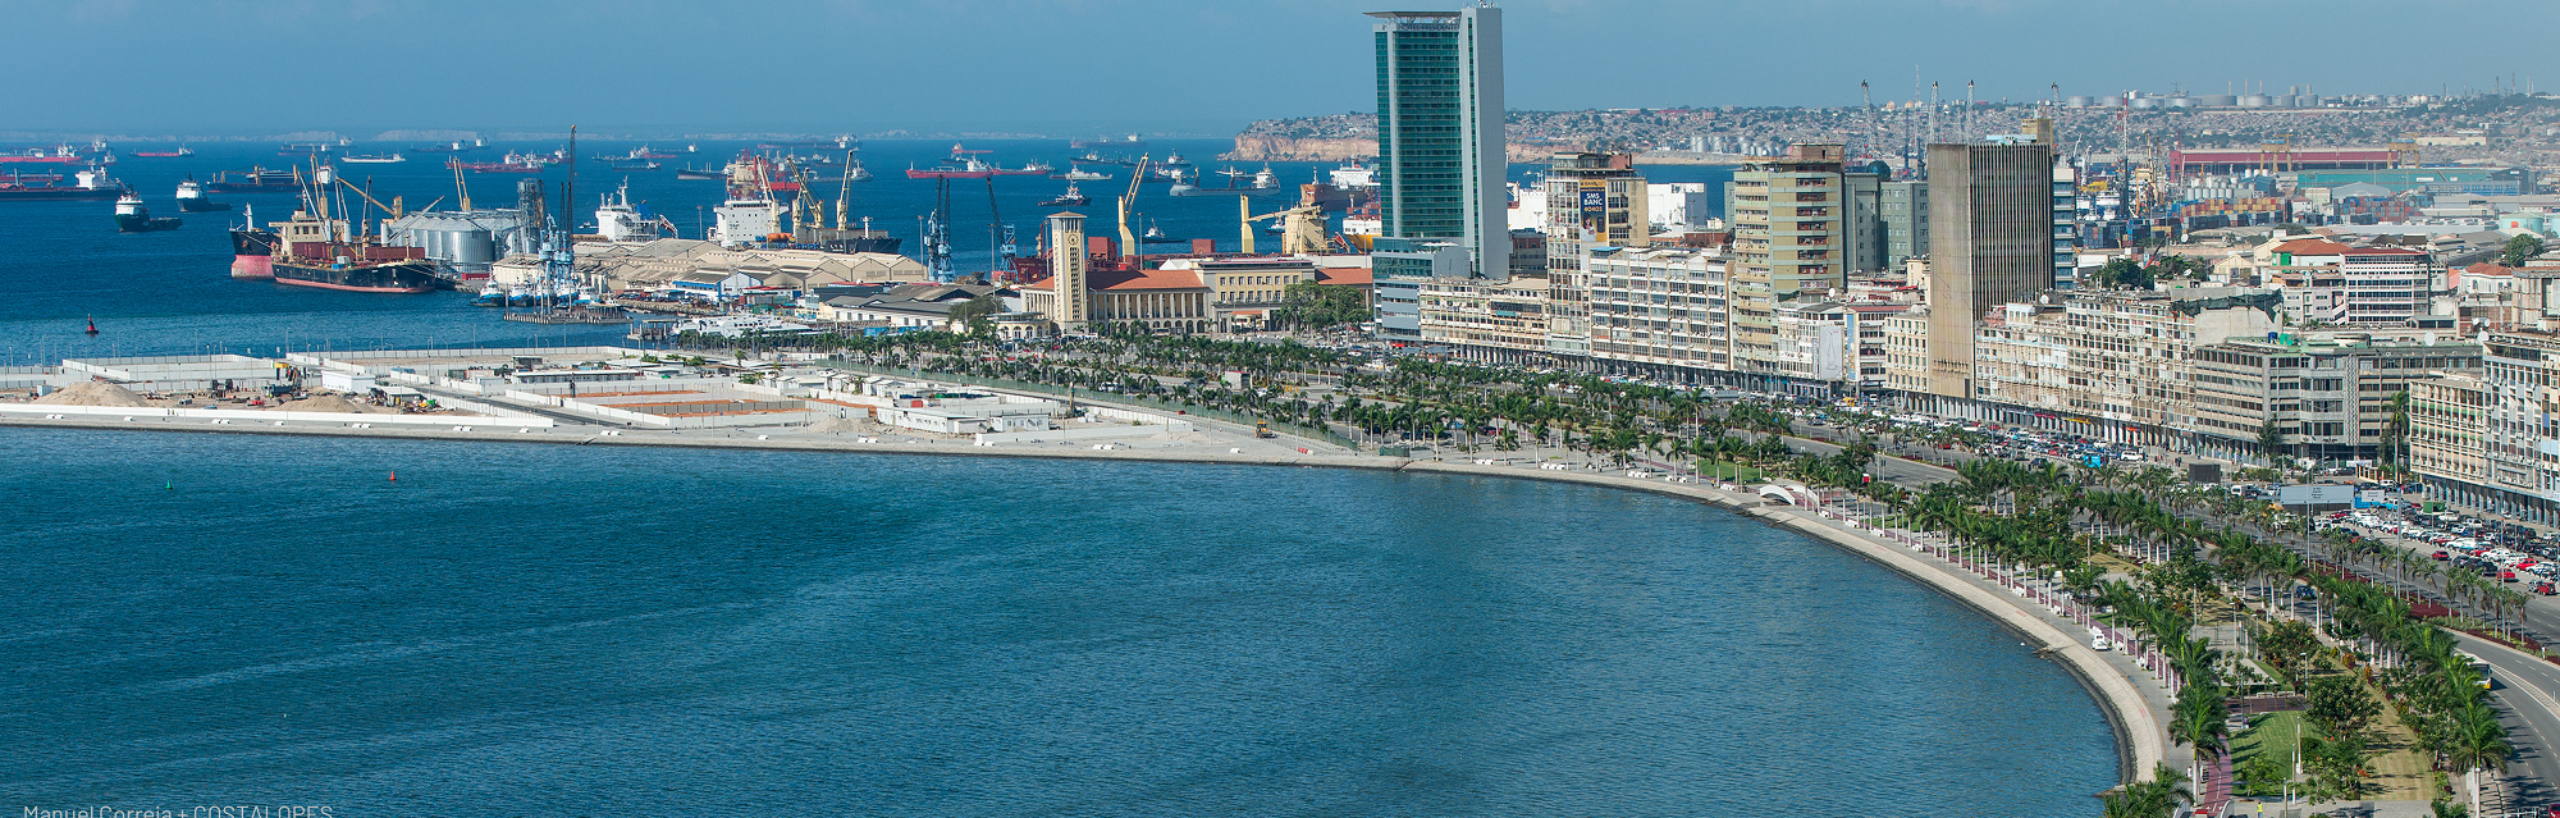 Bay of Luanda, Angola - Image credit Manuel Correia + COSTALOPES - Africell selects Digis Squared to support new network in Angola INOS Managed Services